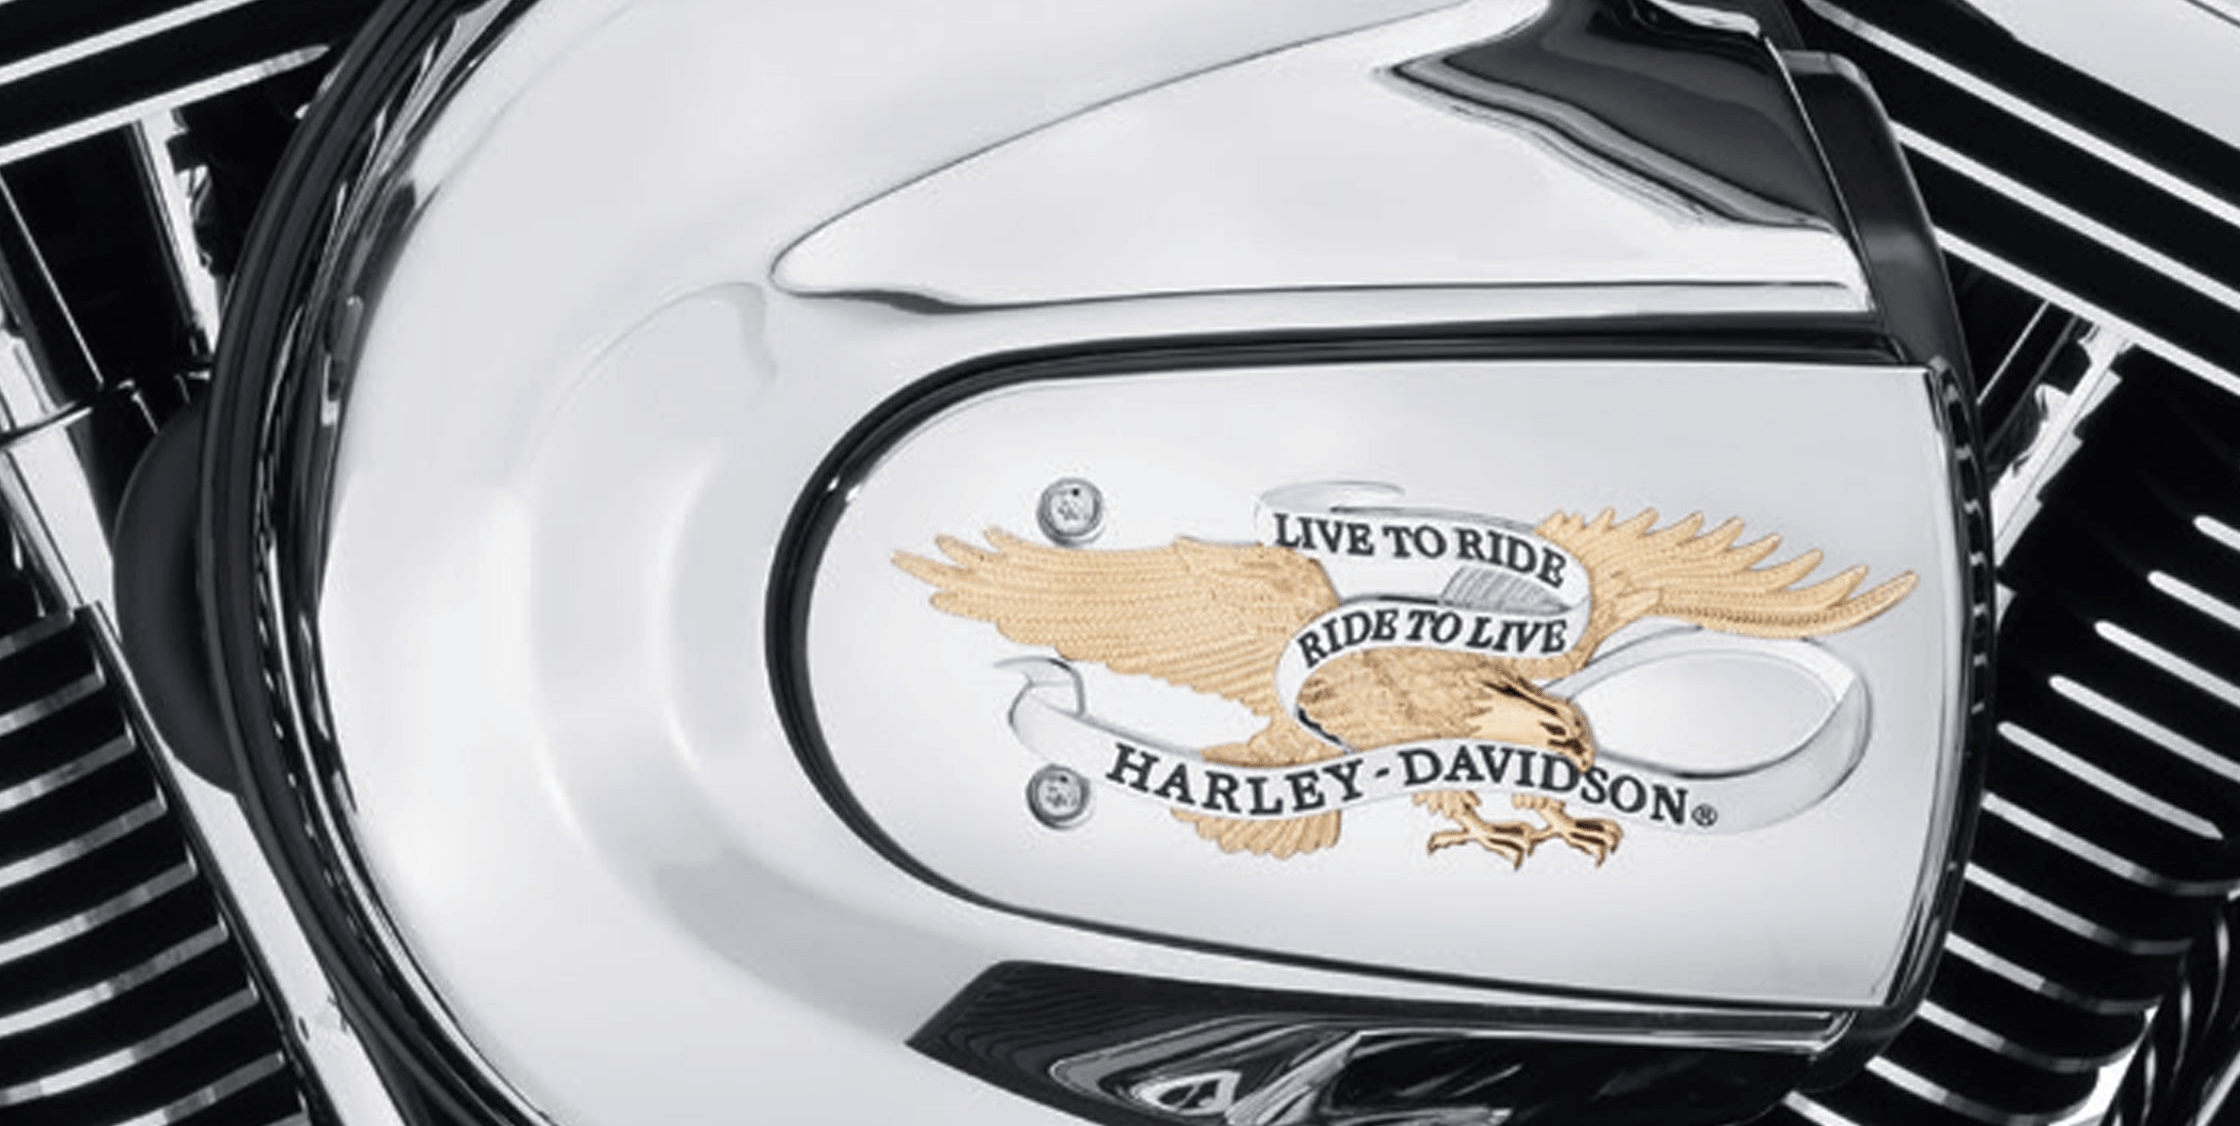 Harley Davidson: «Live to ride, ride to live»